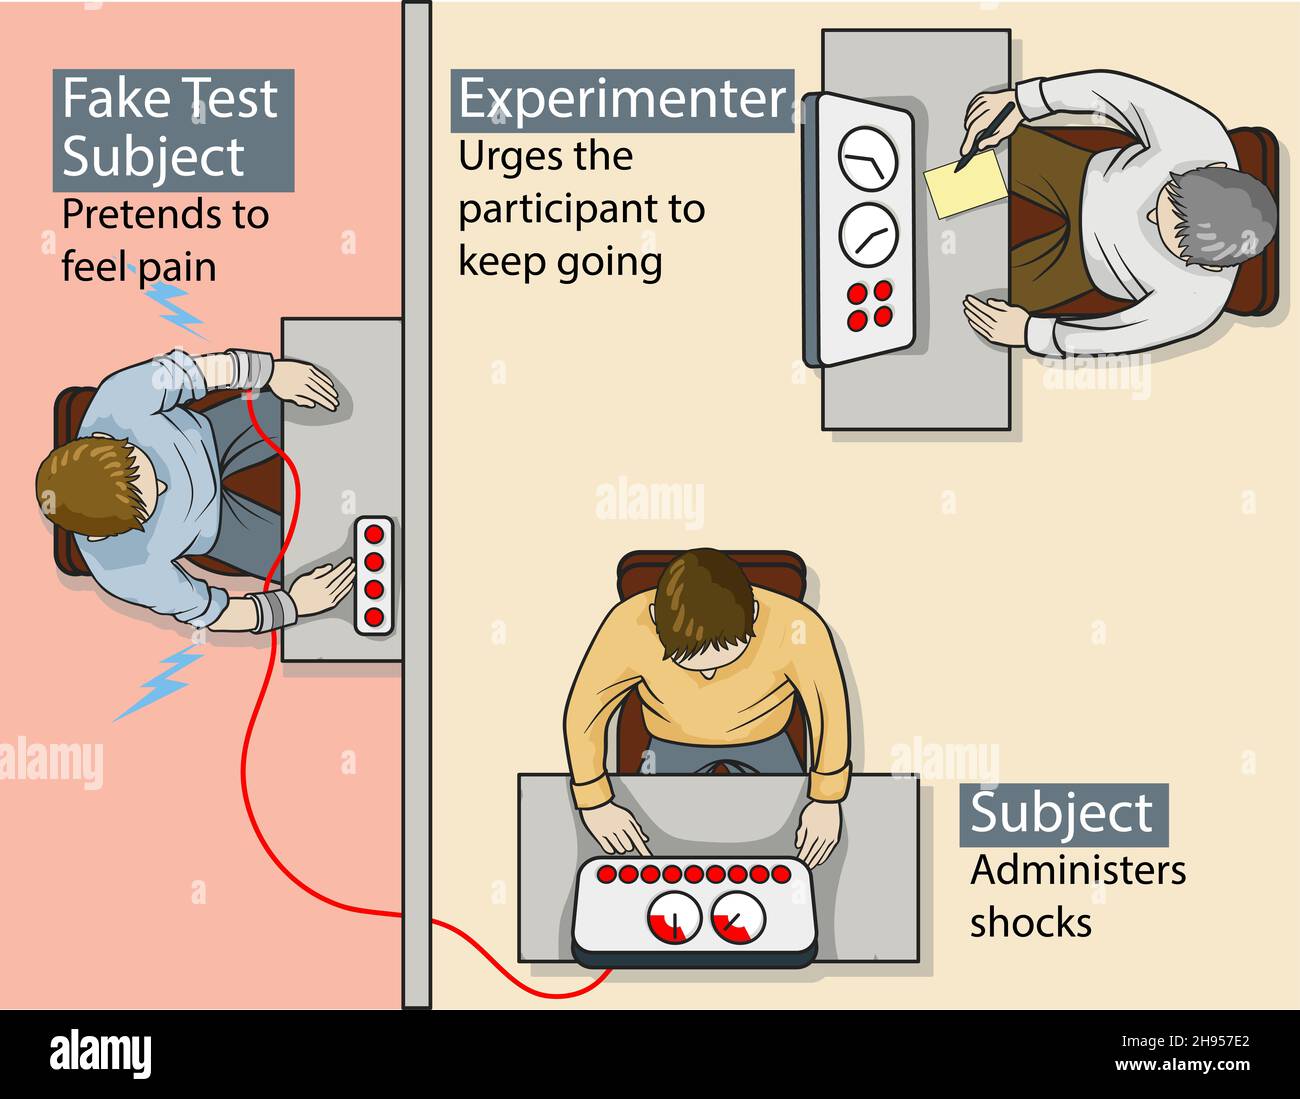 Stanley Milgram Experiment Illustration of the psychological study on obedience to authority figures, 1960s Also known as the Milgram Shock Experiment Stock Photo